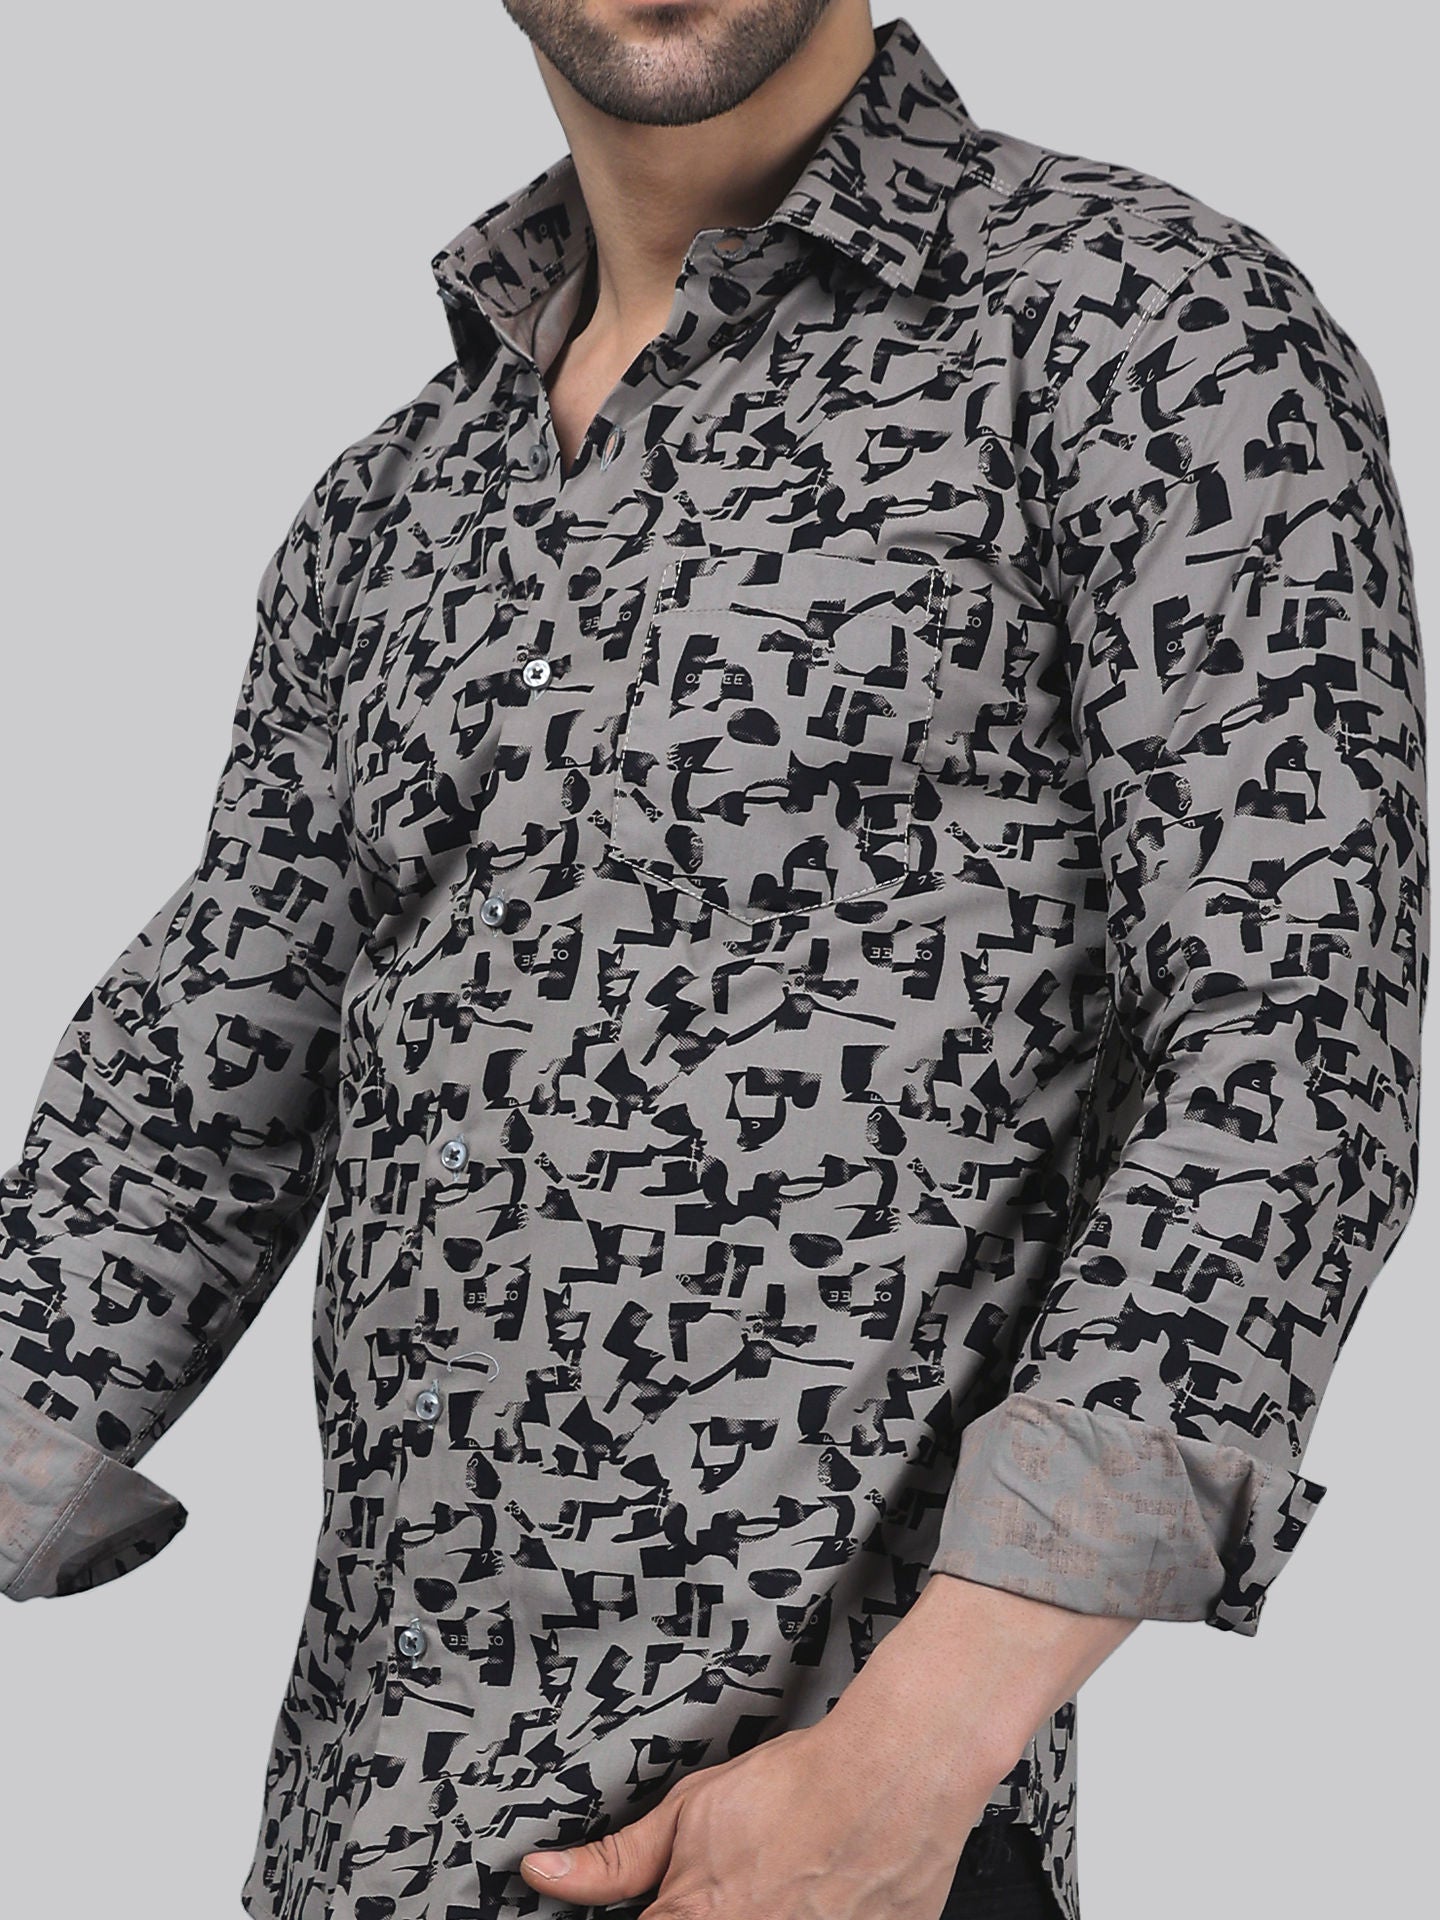 TryBuy Unique Elegant Men's Cotton Casual Printed Full Sleeves Shirt - TryBuy® USA🇺🇸